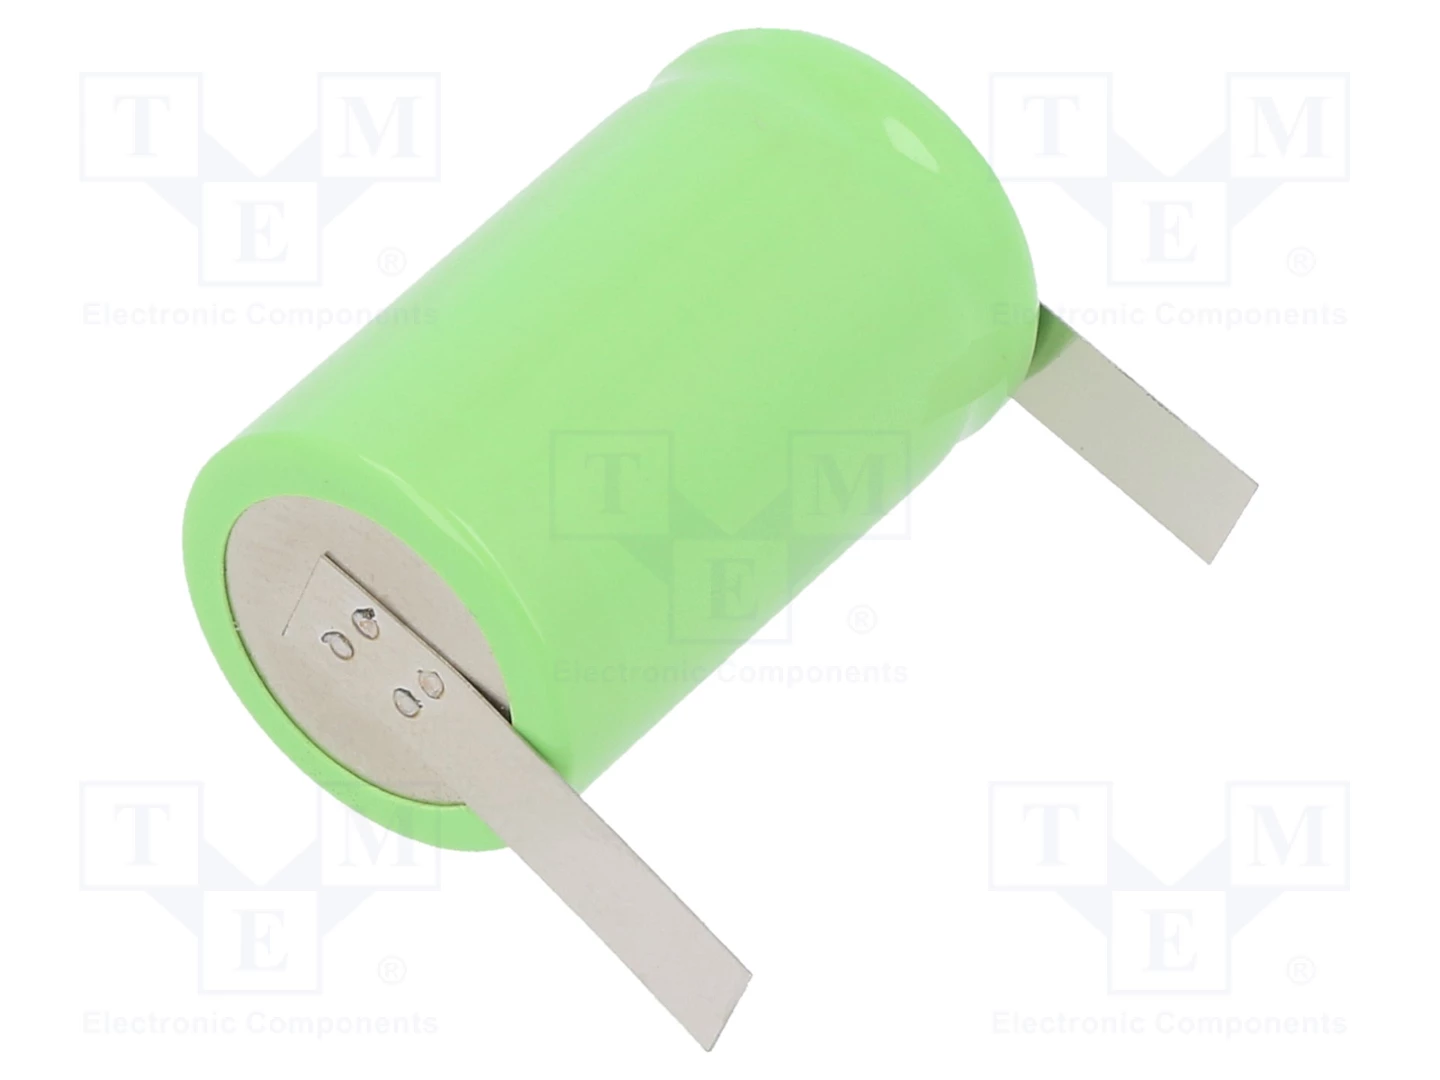 ACCU-2/3A/L - Rechargeable cell Ni-MH 1,2V 900mAh dia 17x29mm